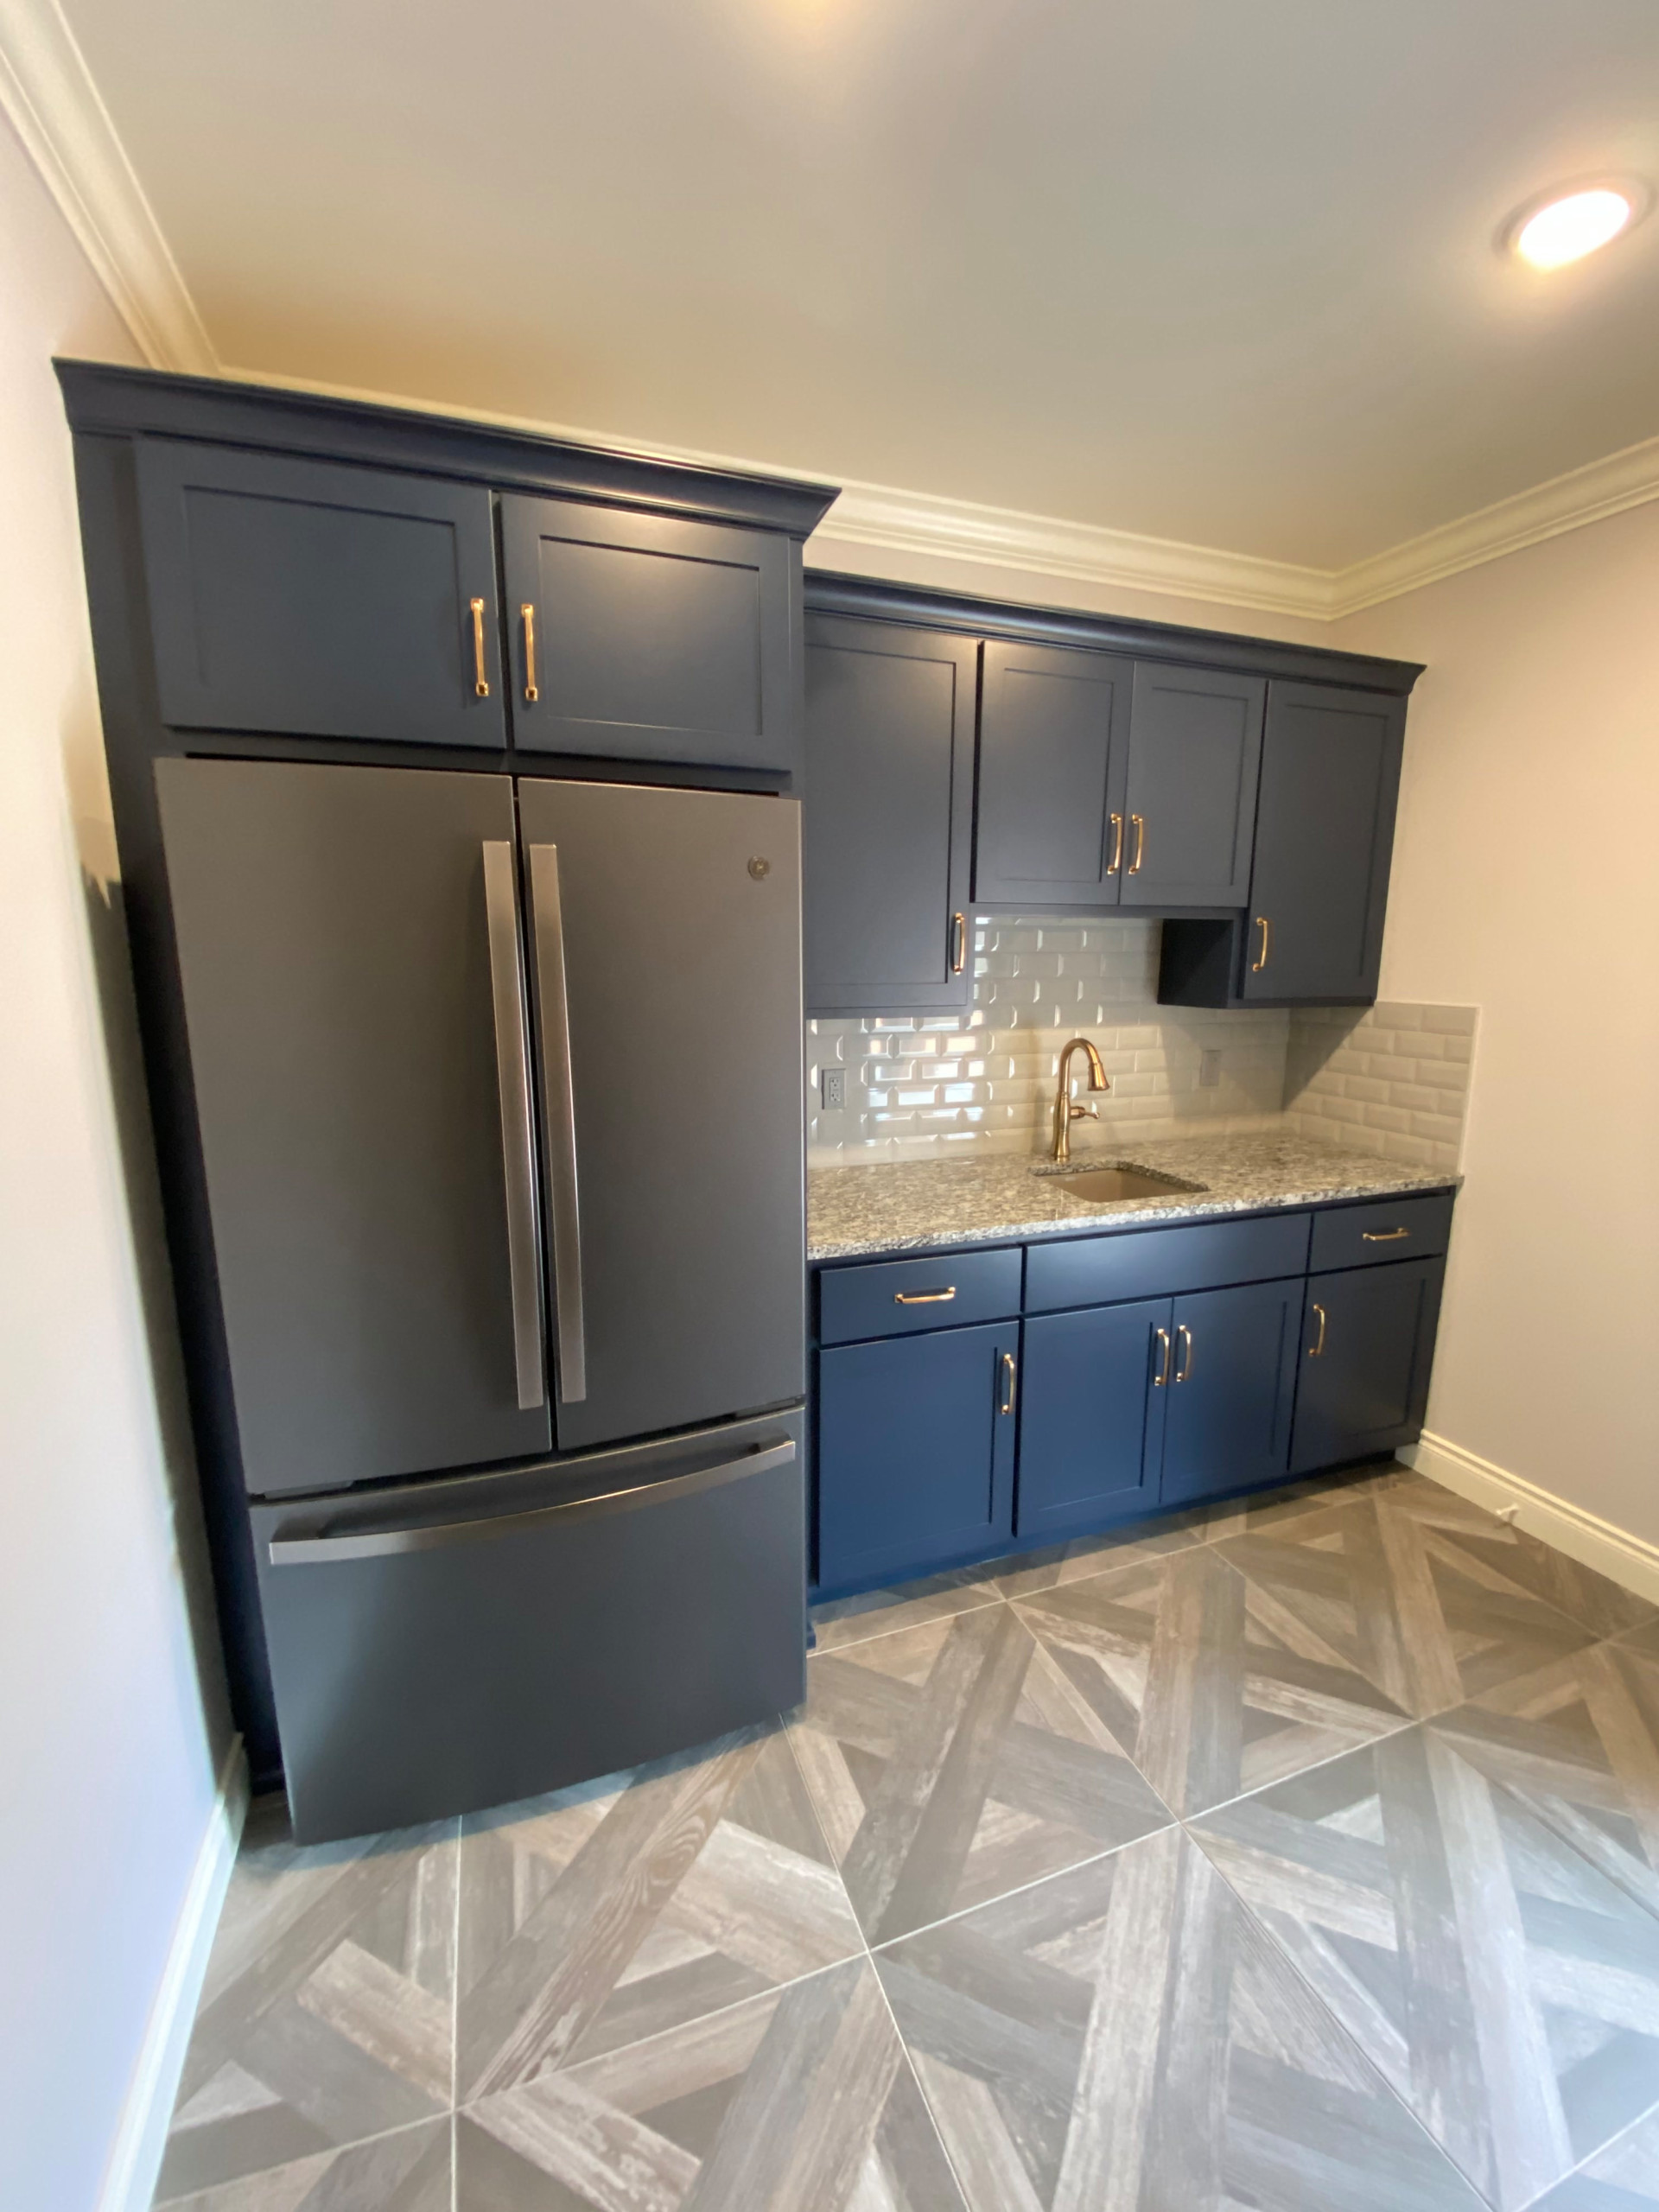 Basement kitchenette with custom painted cabinetry, subway tile, and granite cou